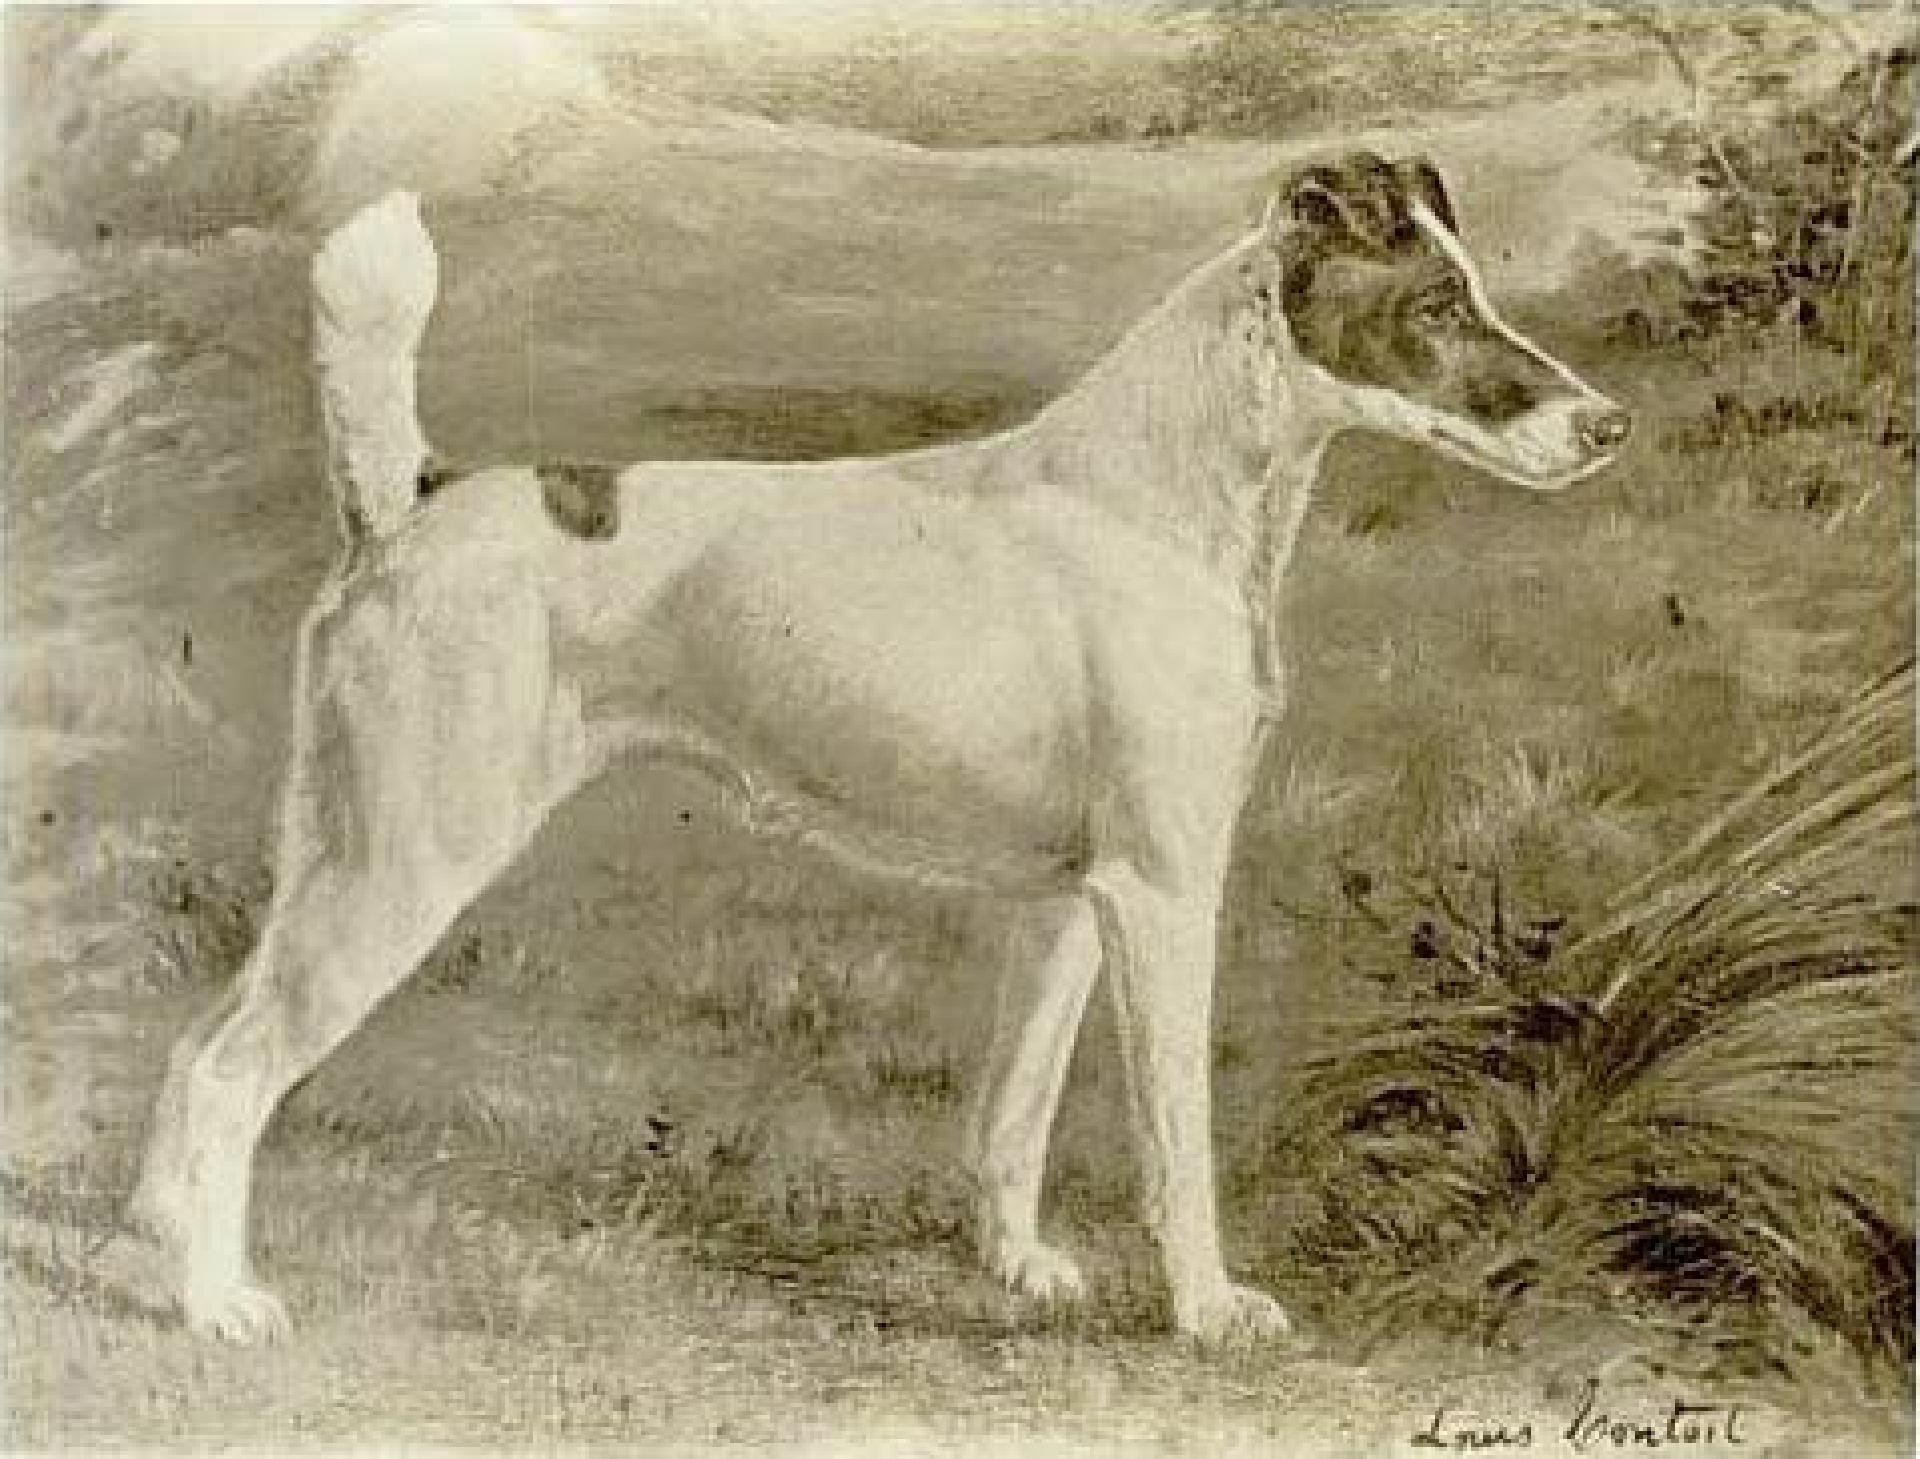 Painting of Warren Remedy, Fox Terrier. First best in show winner at the Westminster Kennel Club Dog show, and the only dog to have won that prize on three occasions. Artist is Gustav Muss-Arnolt, who died in 1927